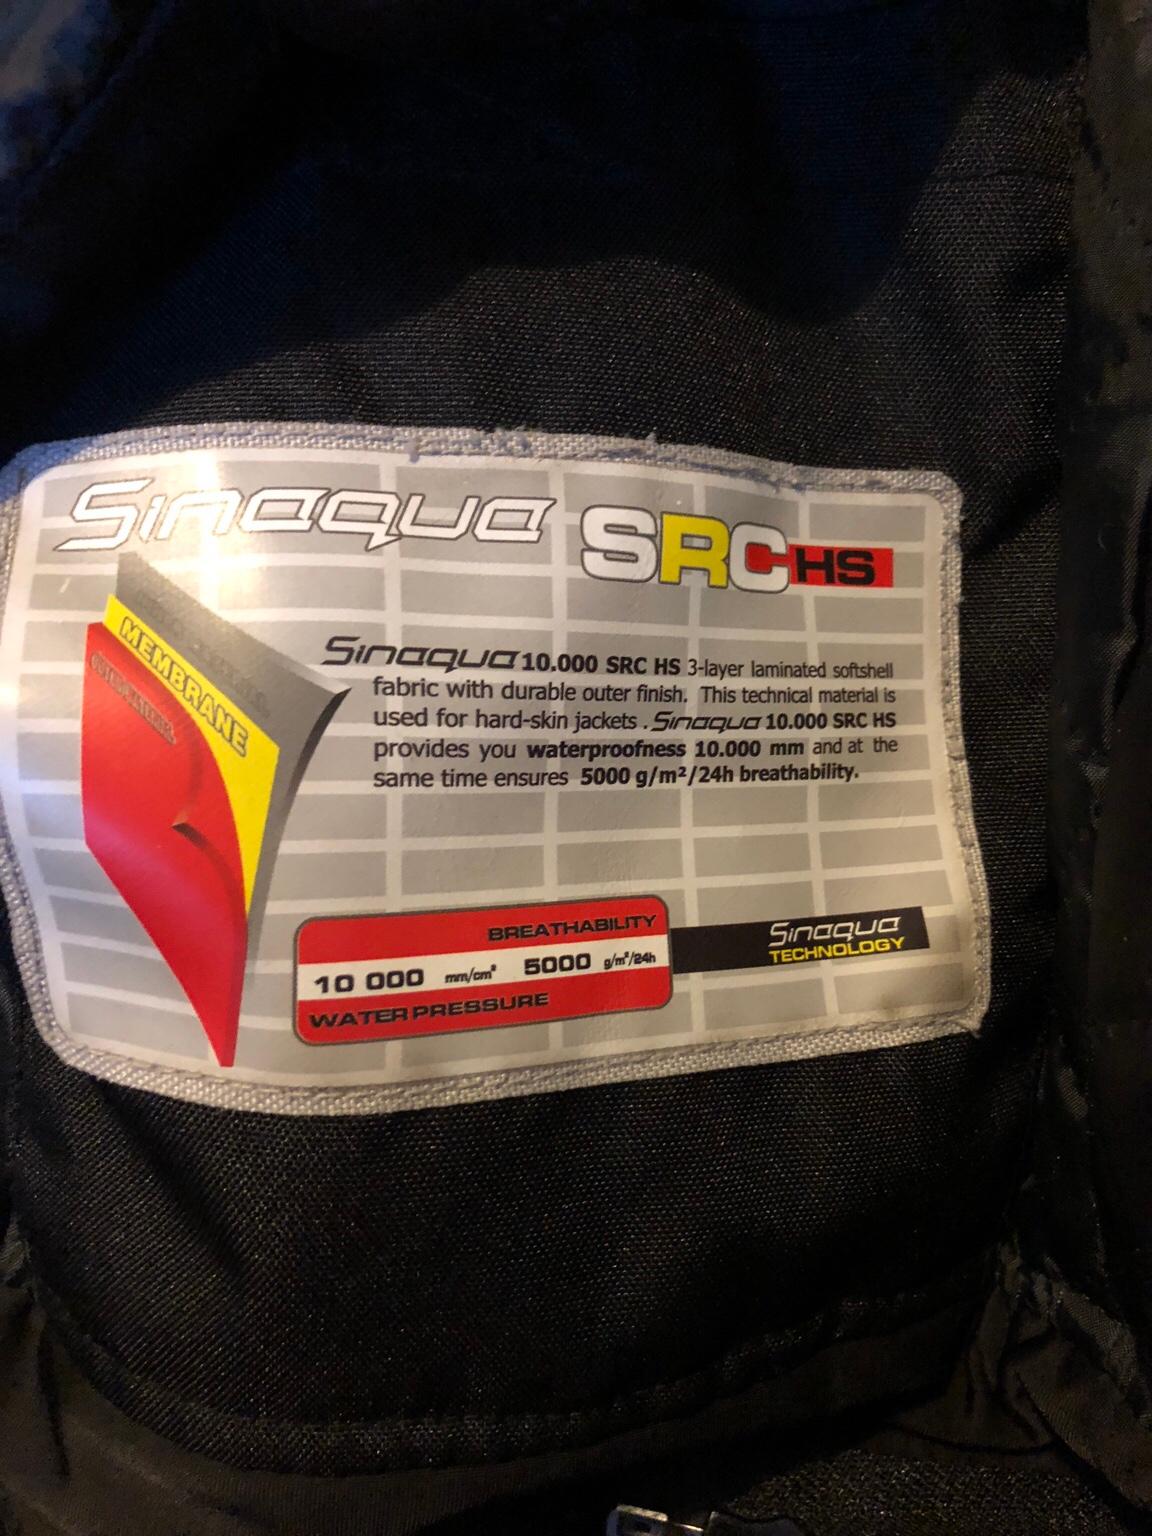 Rst r18 jacket and trousers in WS11 Cannock Chase for £80.00 for sale ...